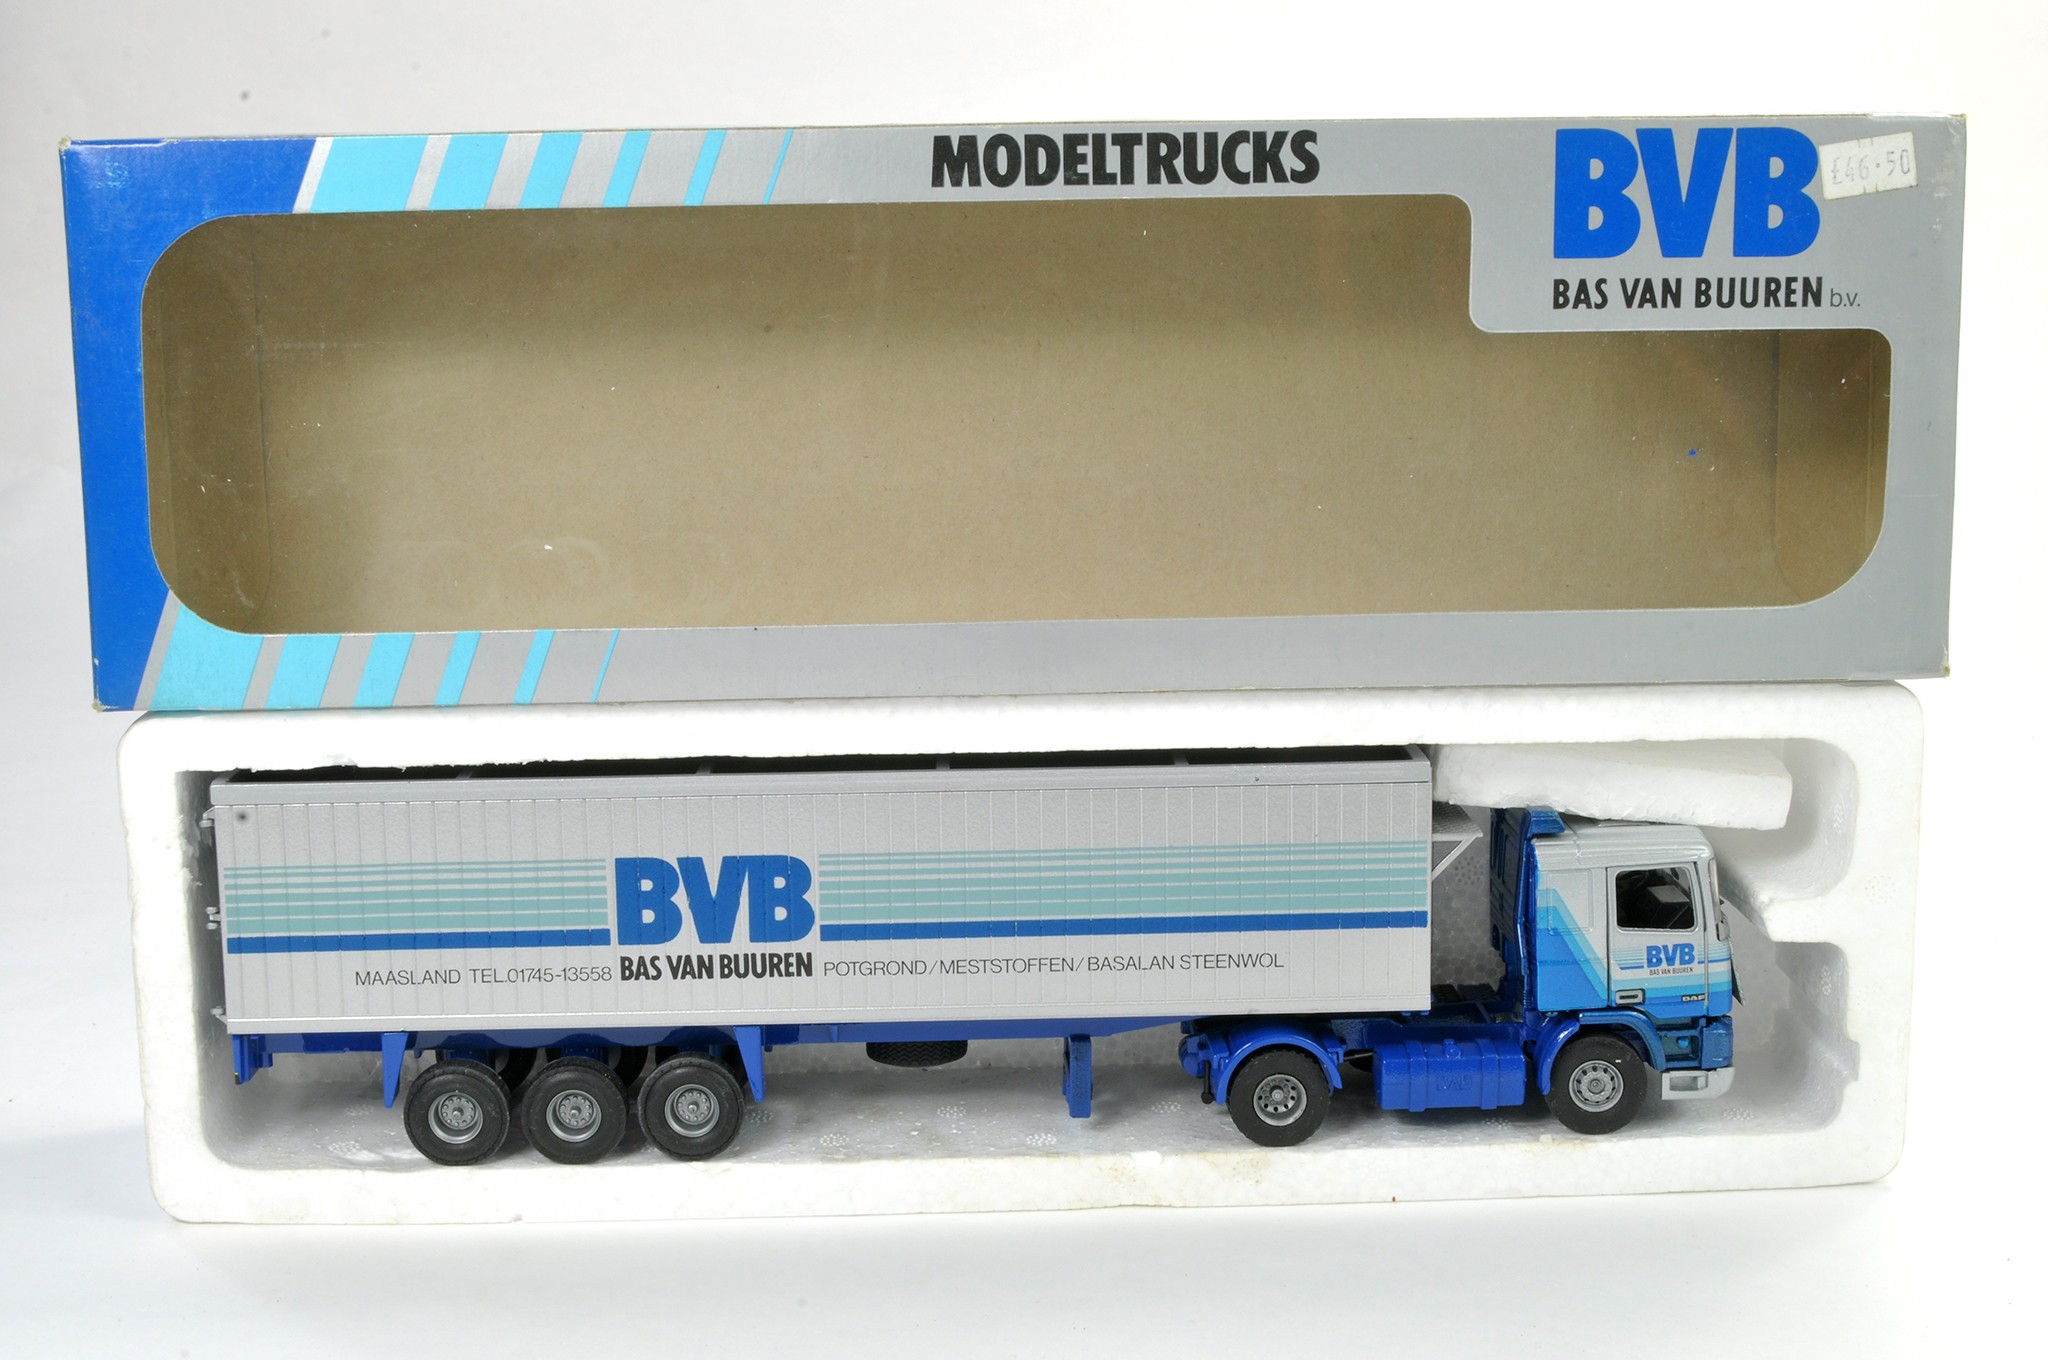 Tekno 1/50 Model Truck issue comprising Leyland DAF Box Trailer in the livery of BVB. Appears